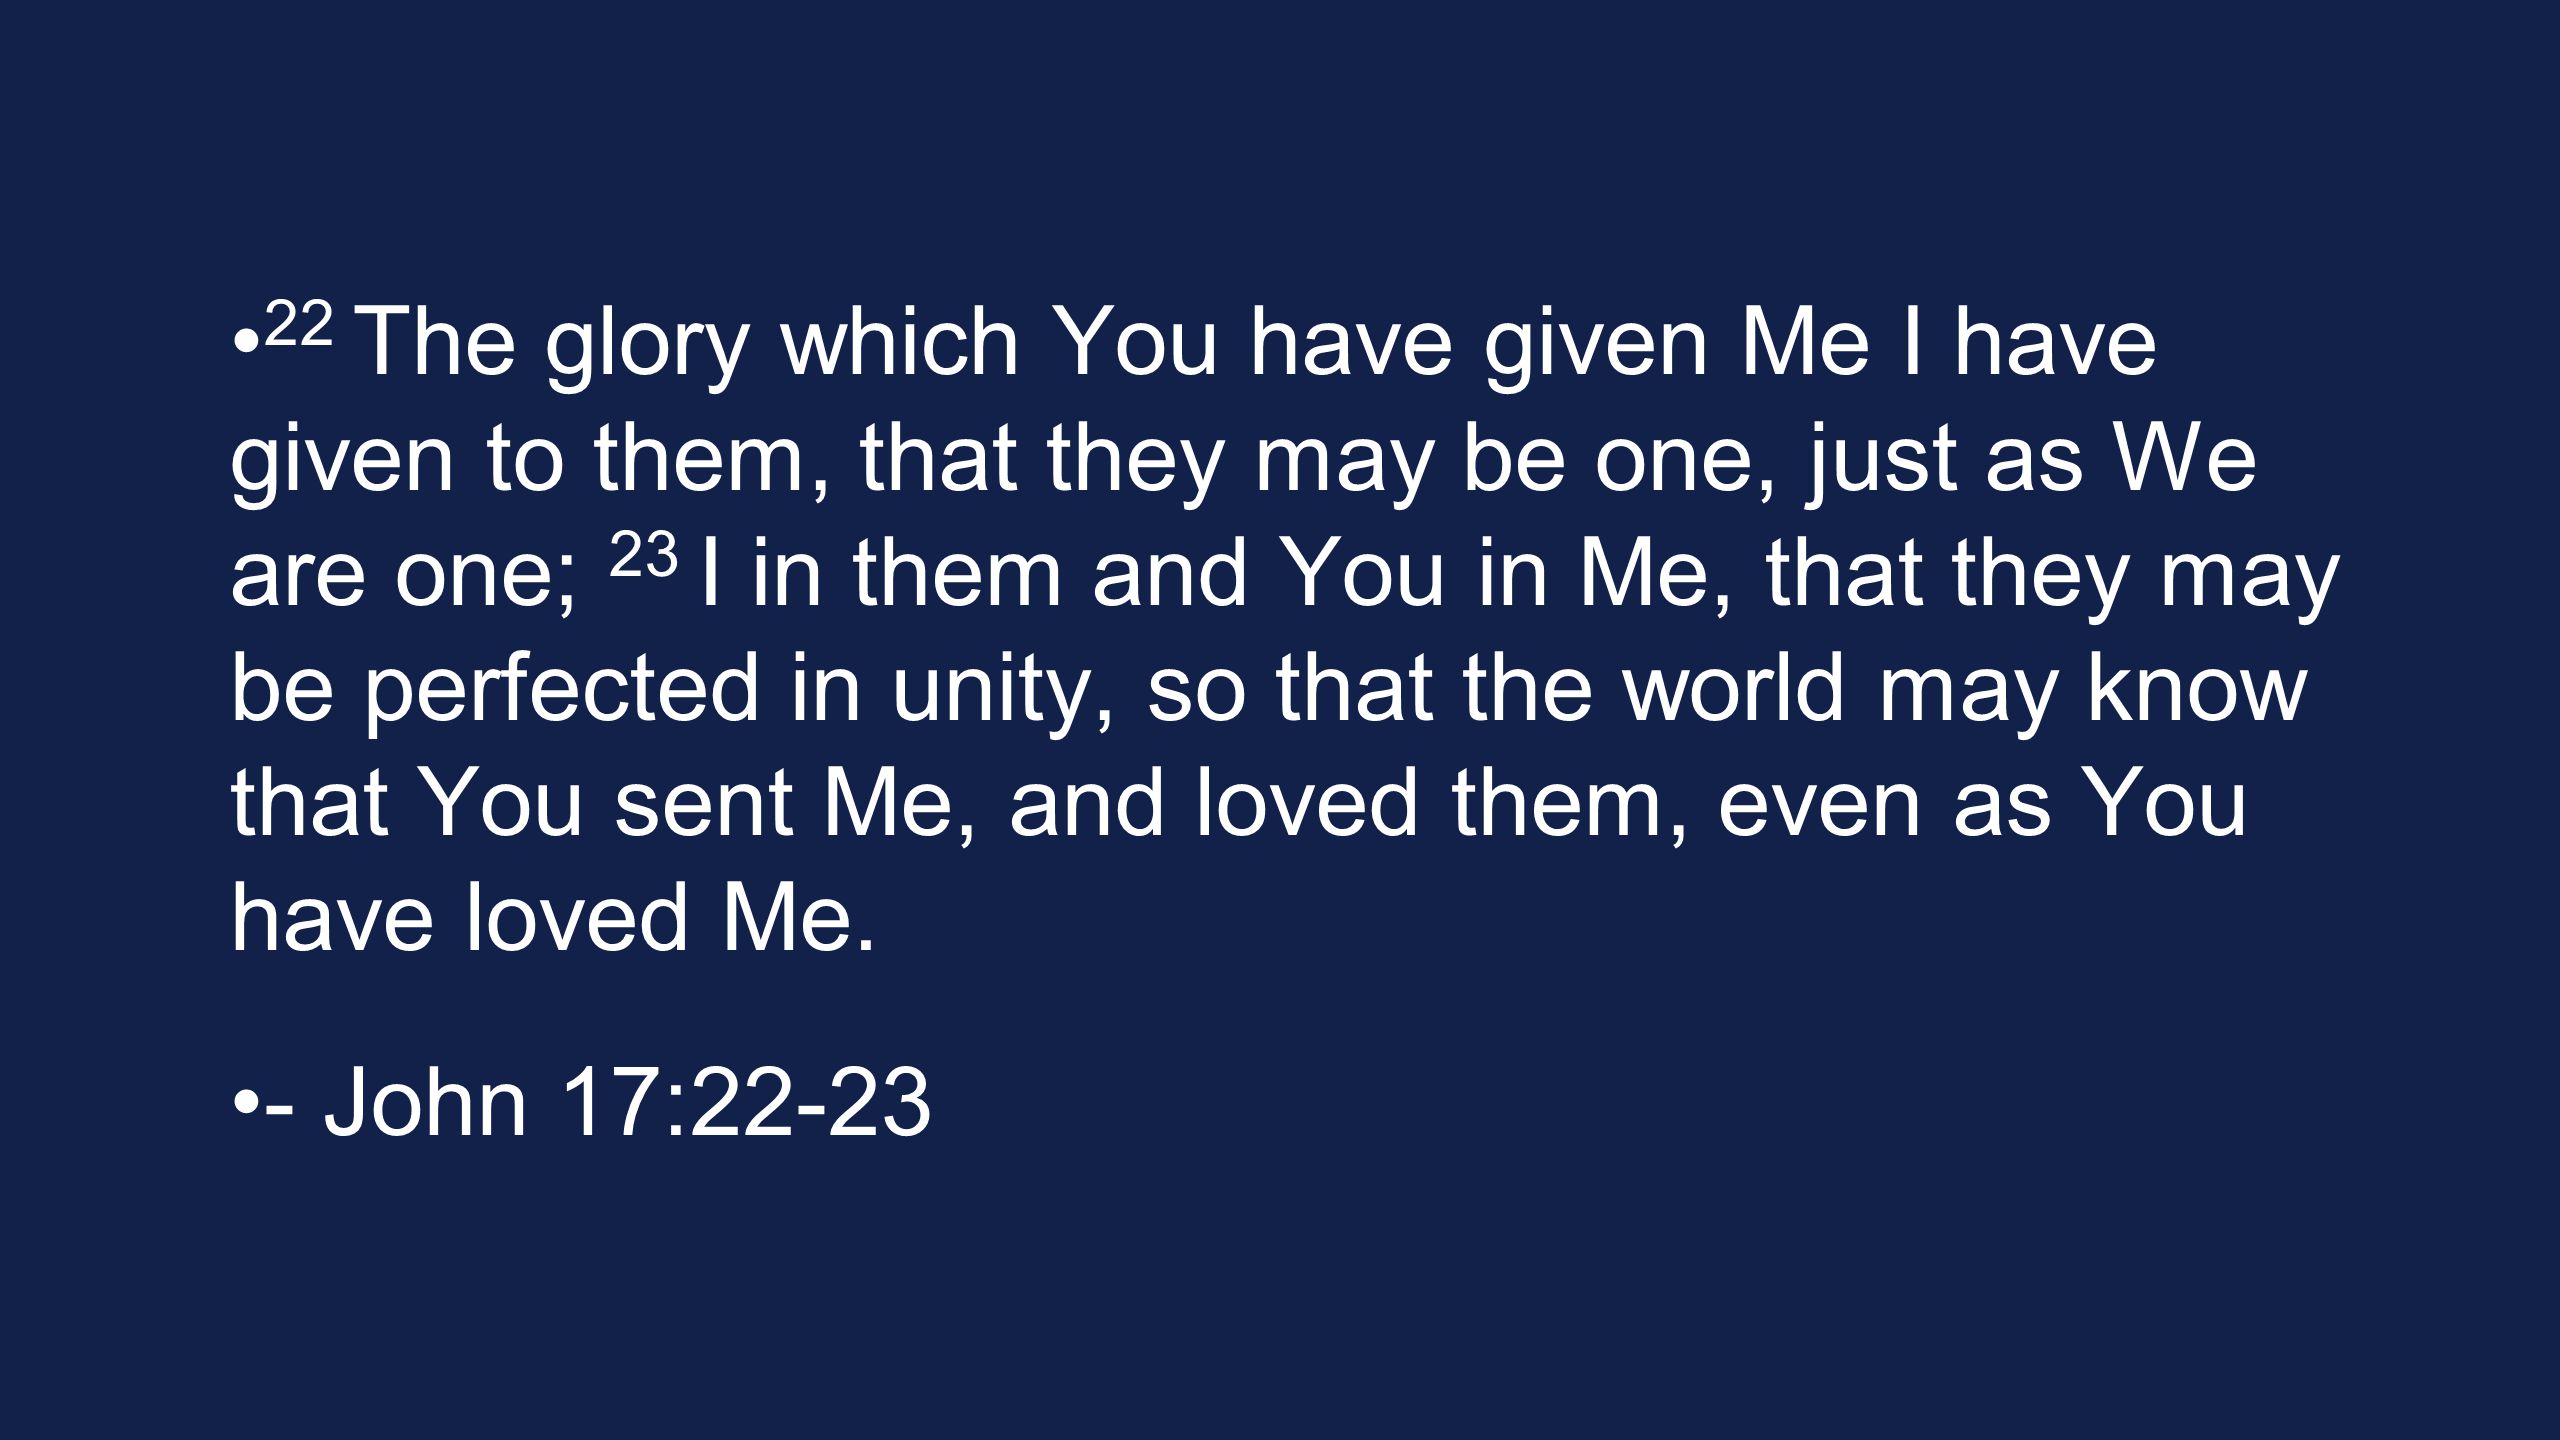 22 The glory which You have given Me I have given to them, that they may be one, just as We are one; 23 I in them and You in Me, that they may be perfected in unity, so that the world may know that You sent Me, and loved them, even as You have loved Me.